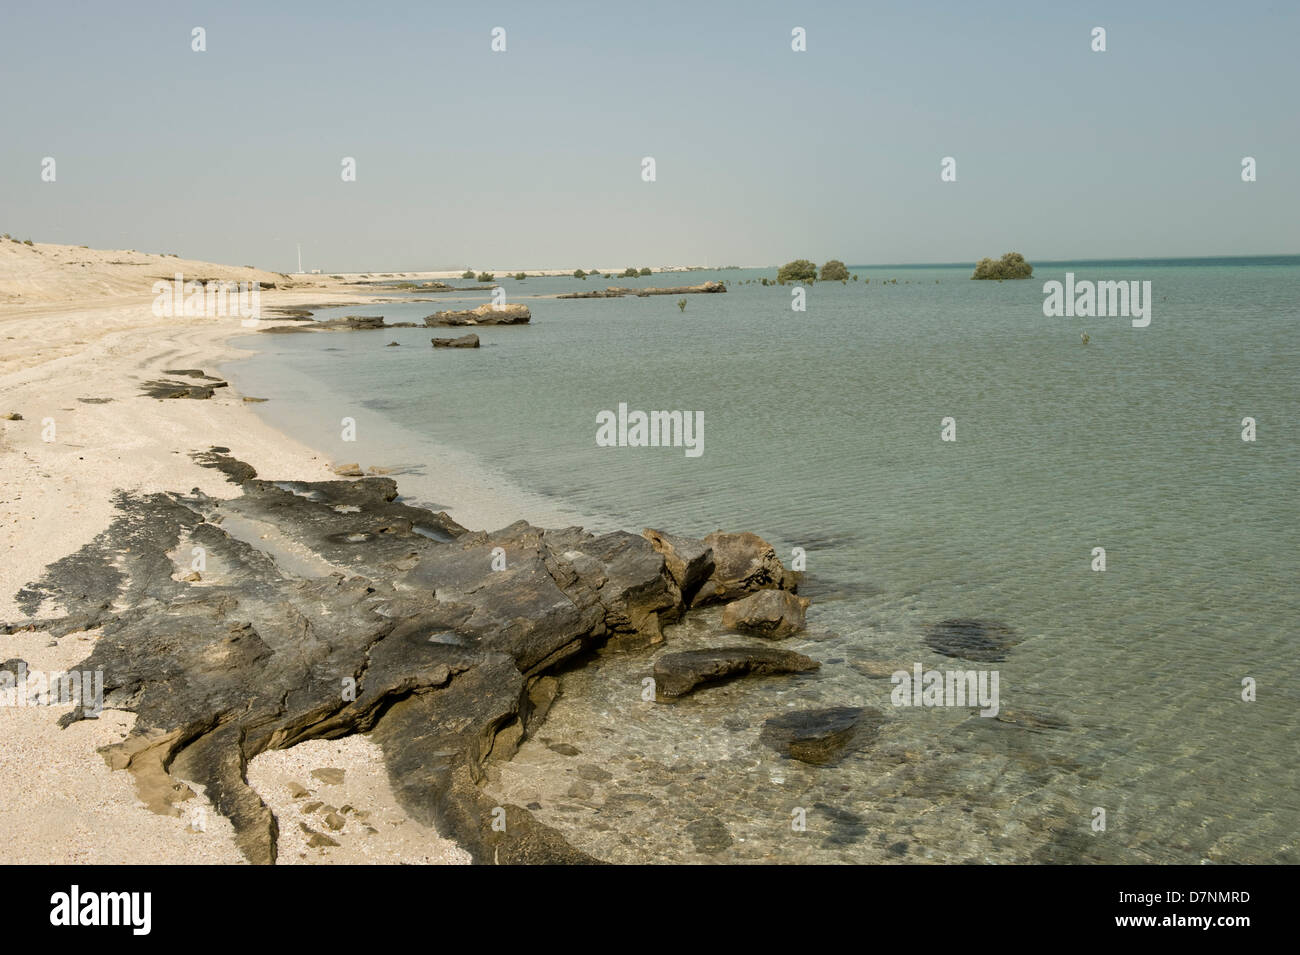 A remote Abu Dhabi beach with rocks, sand sea on the Arabian Gulf at high water and isolate mature and young grey mangroves Stock Photo